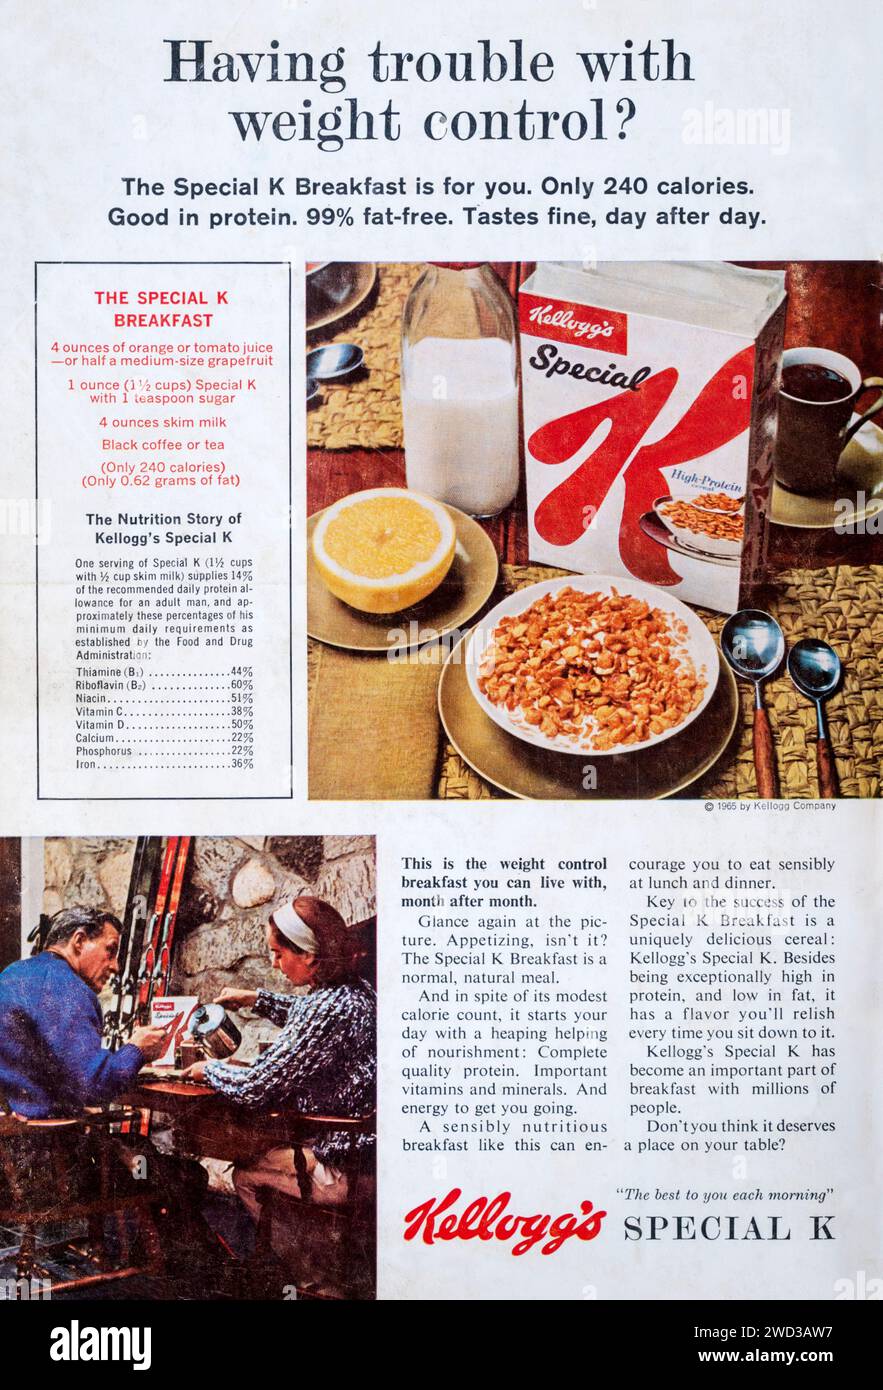 1965 magazine advertisement for Kellogg's Special K breakfast cereal. Stock Photo